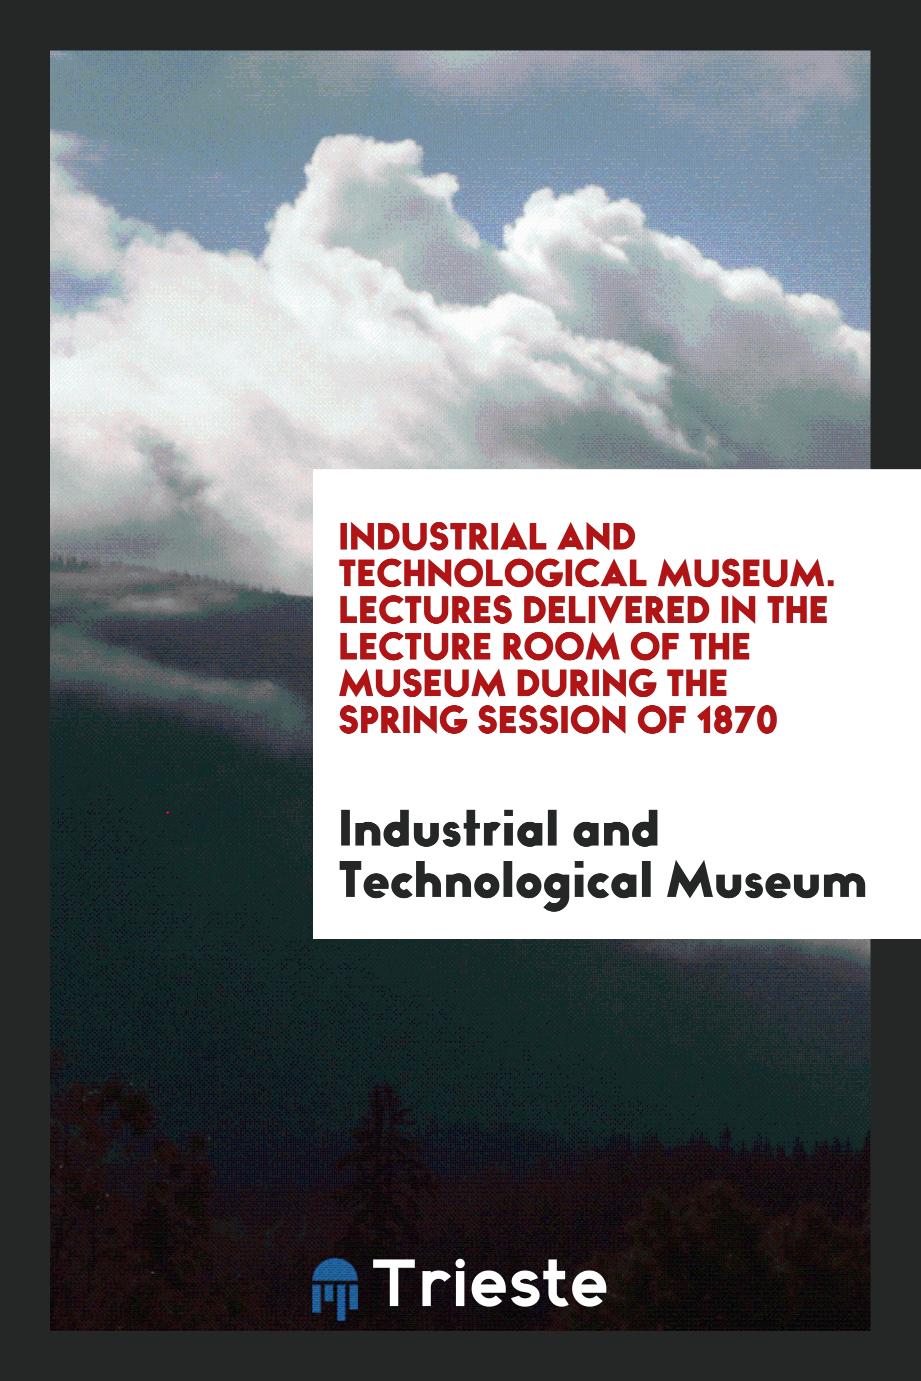 Industrial and Technological Museum. Lectures Delivered in the Lecture Room of the Museum during the Spring Session of 1870